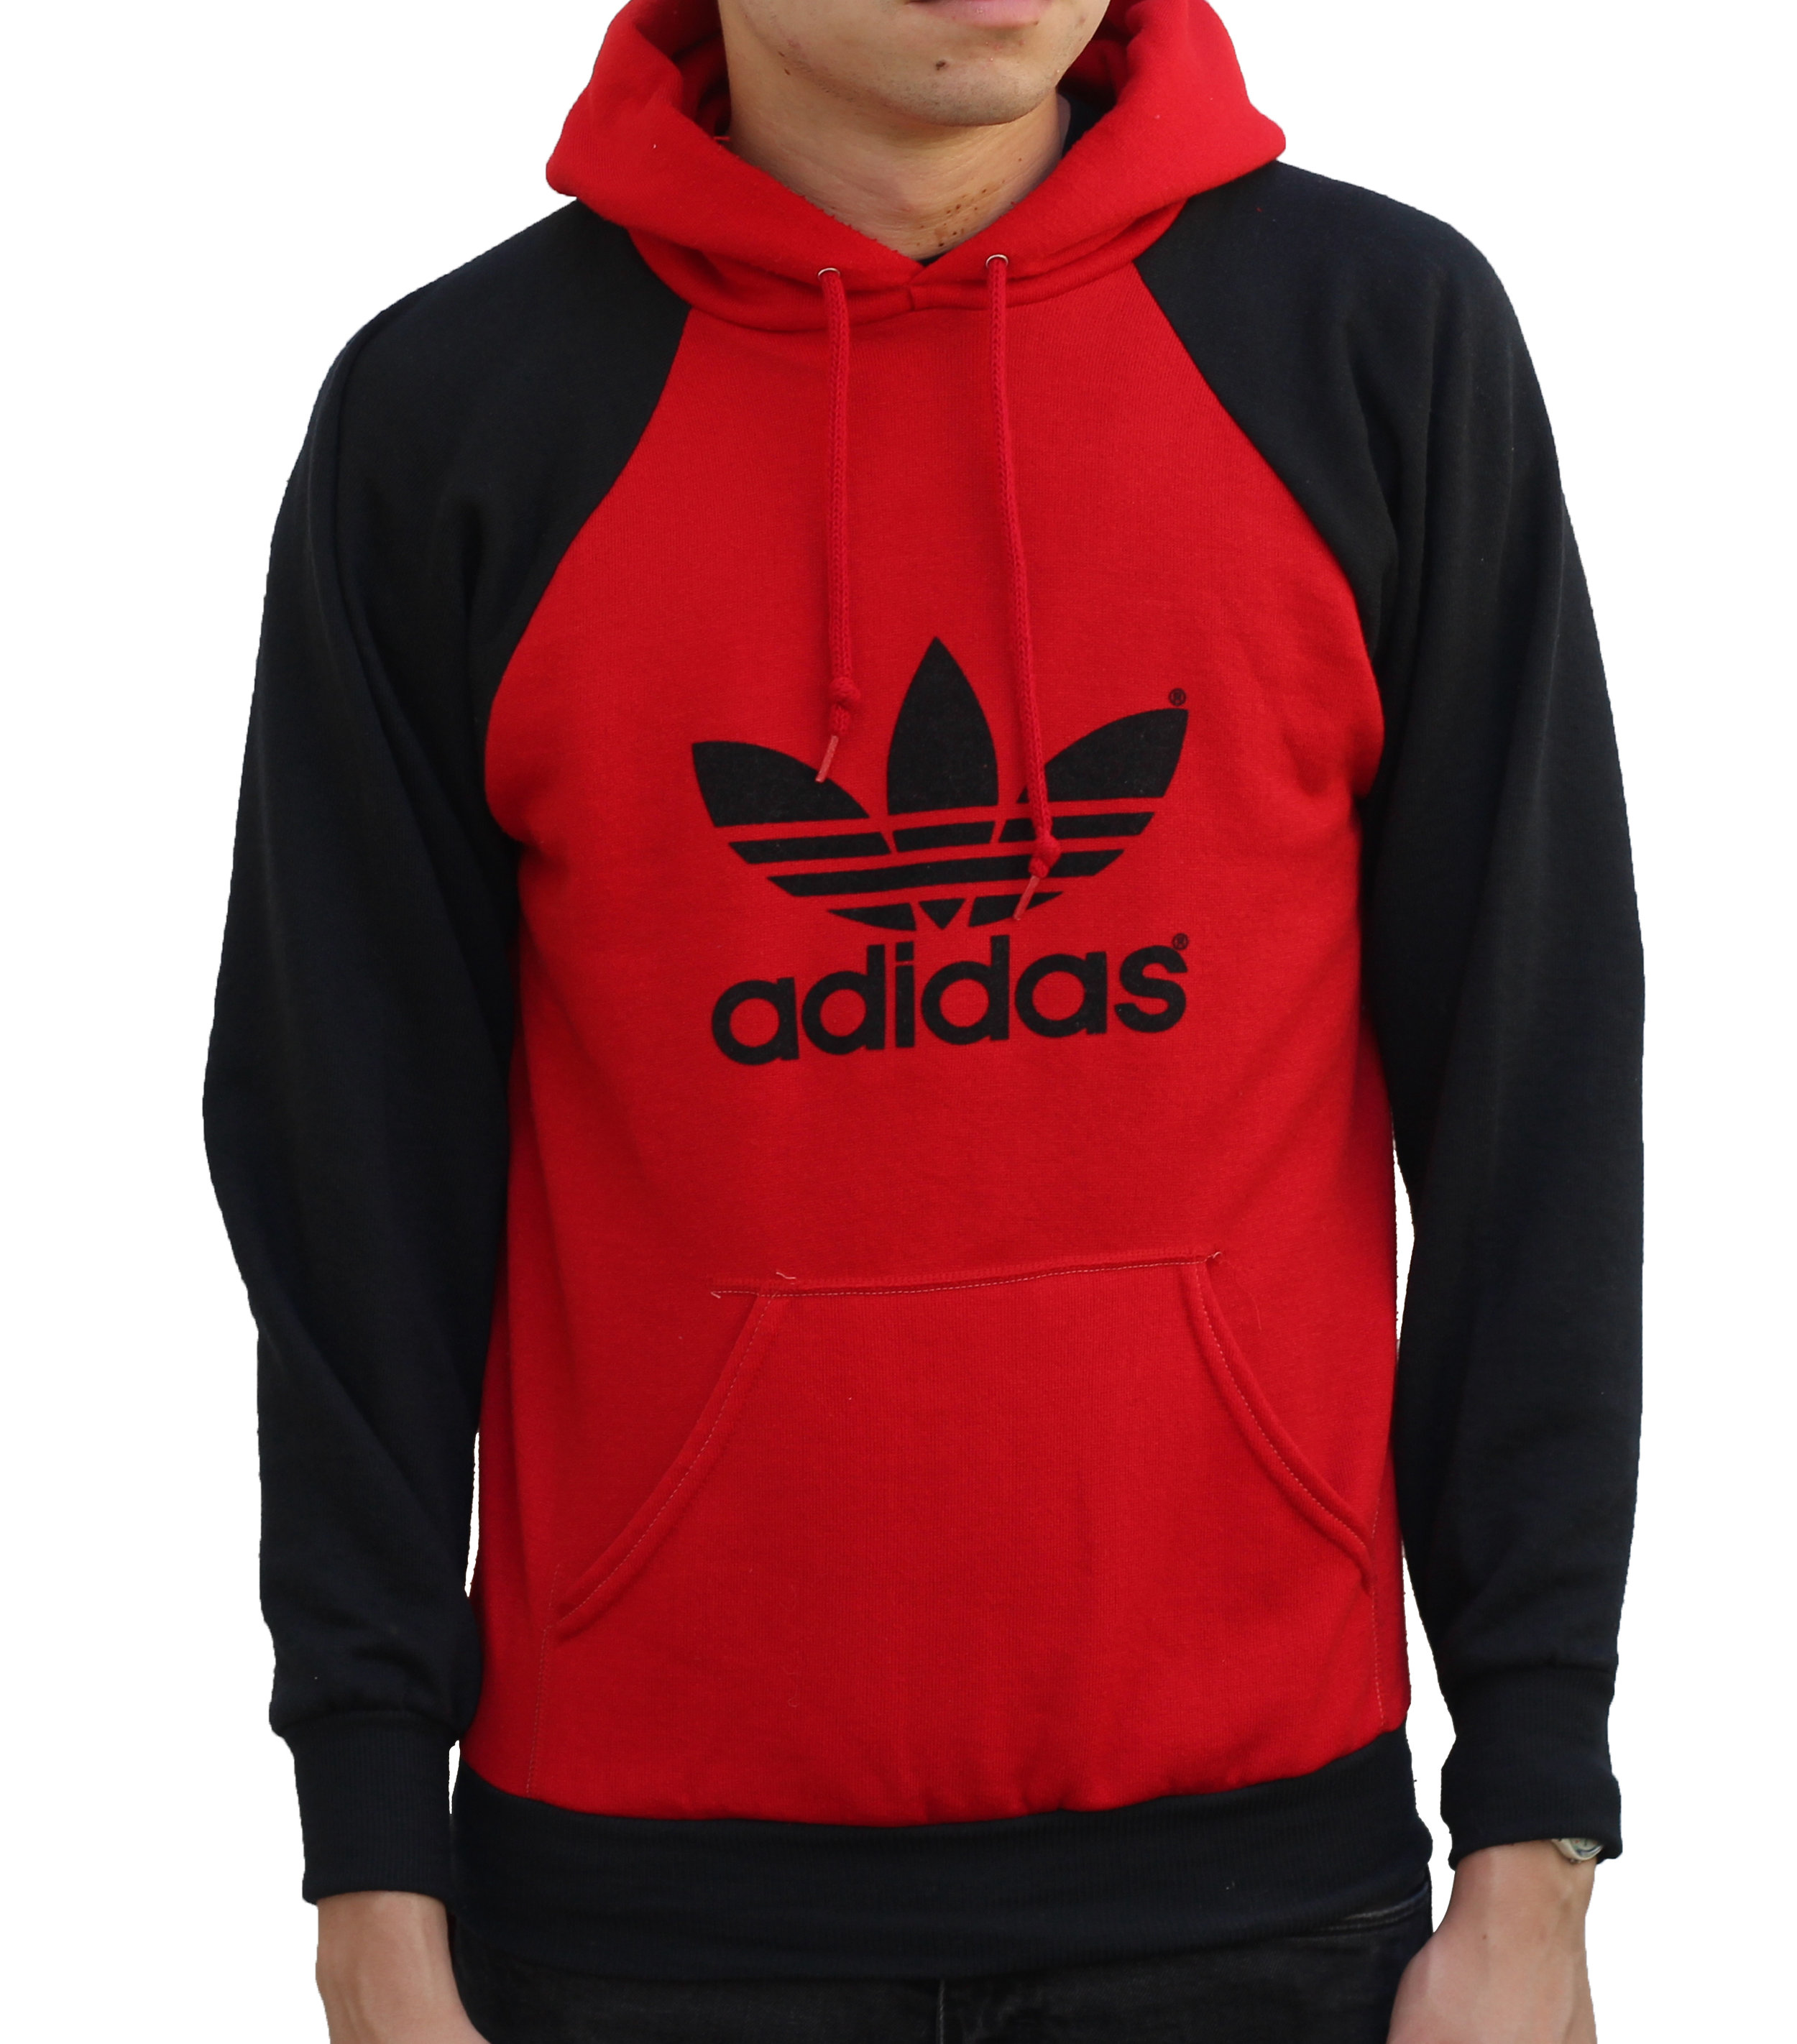 red and black adidas sweater